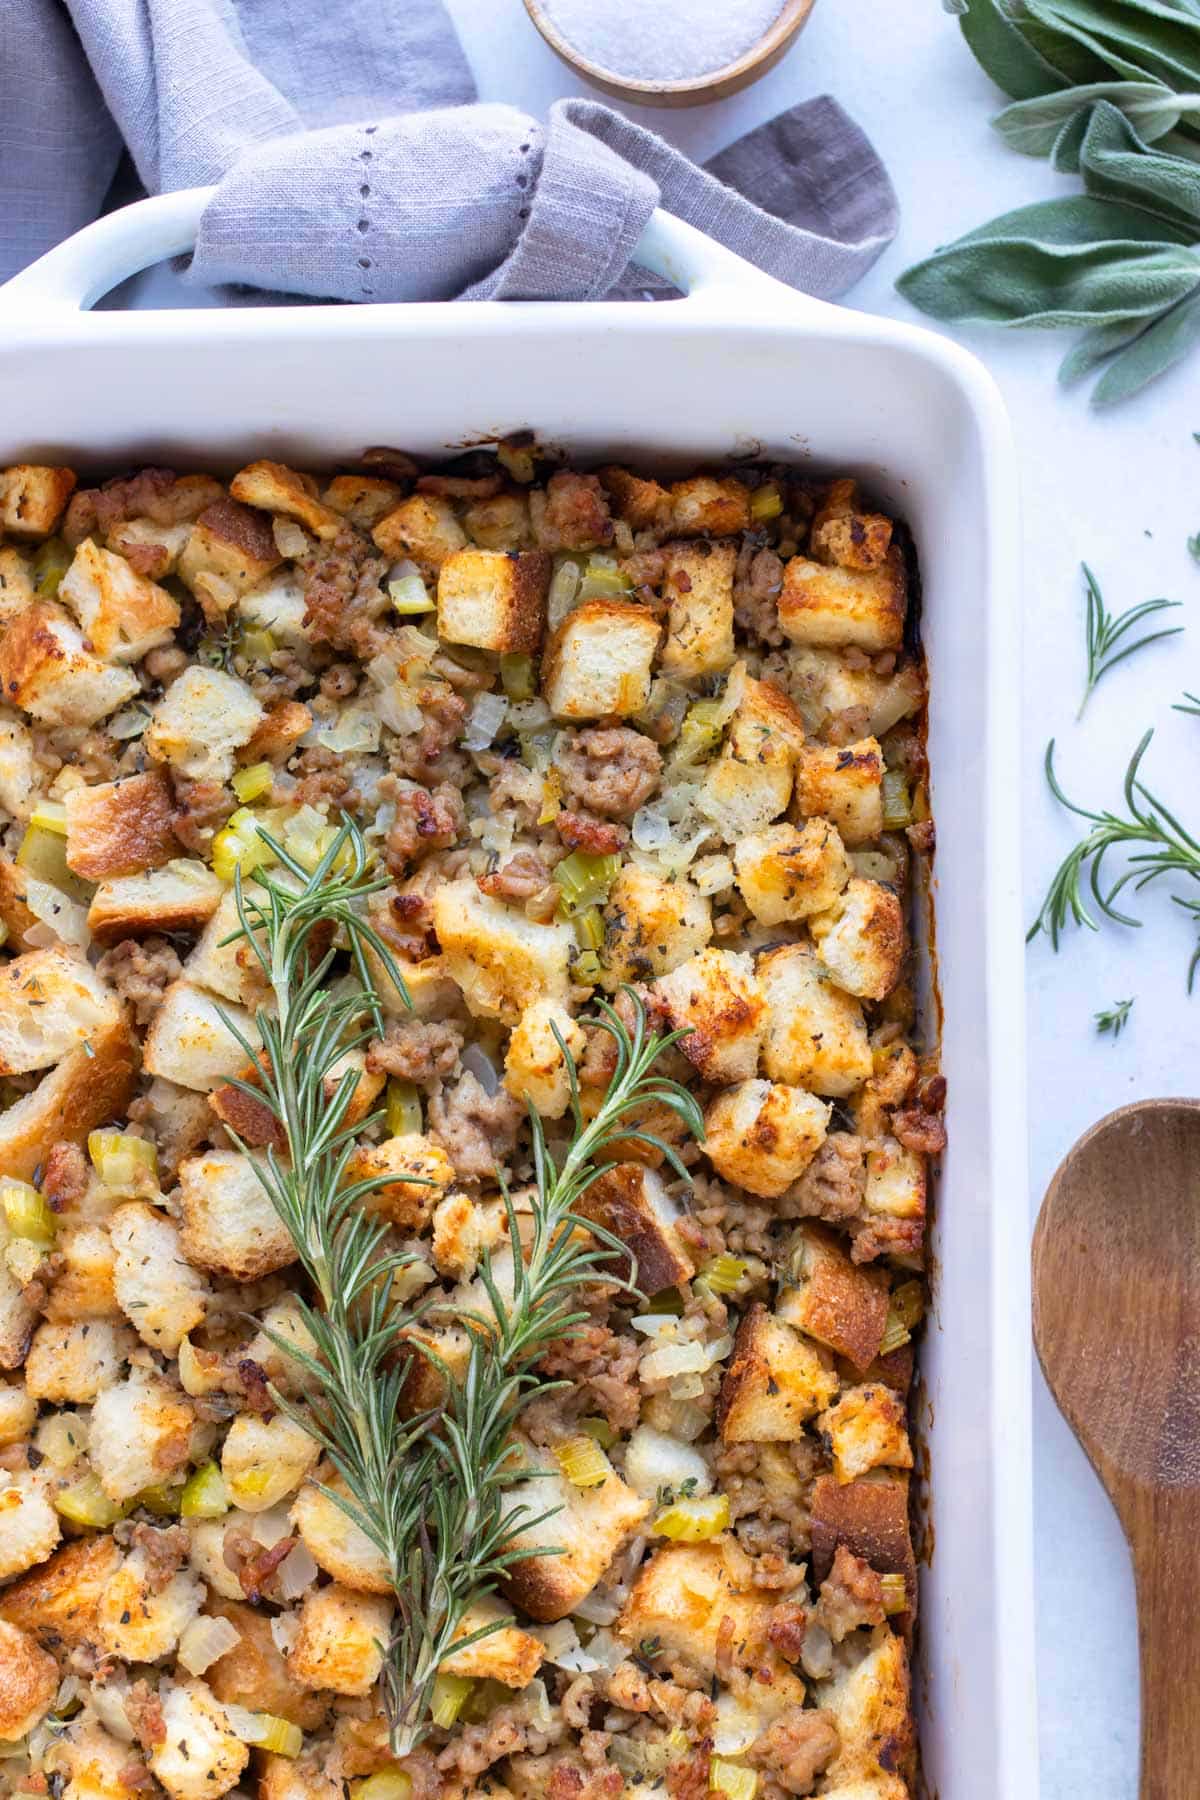 Homemade sausage stuffing is served with fresh herbs for a Fall side dish.